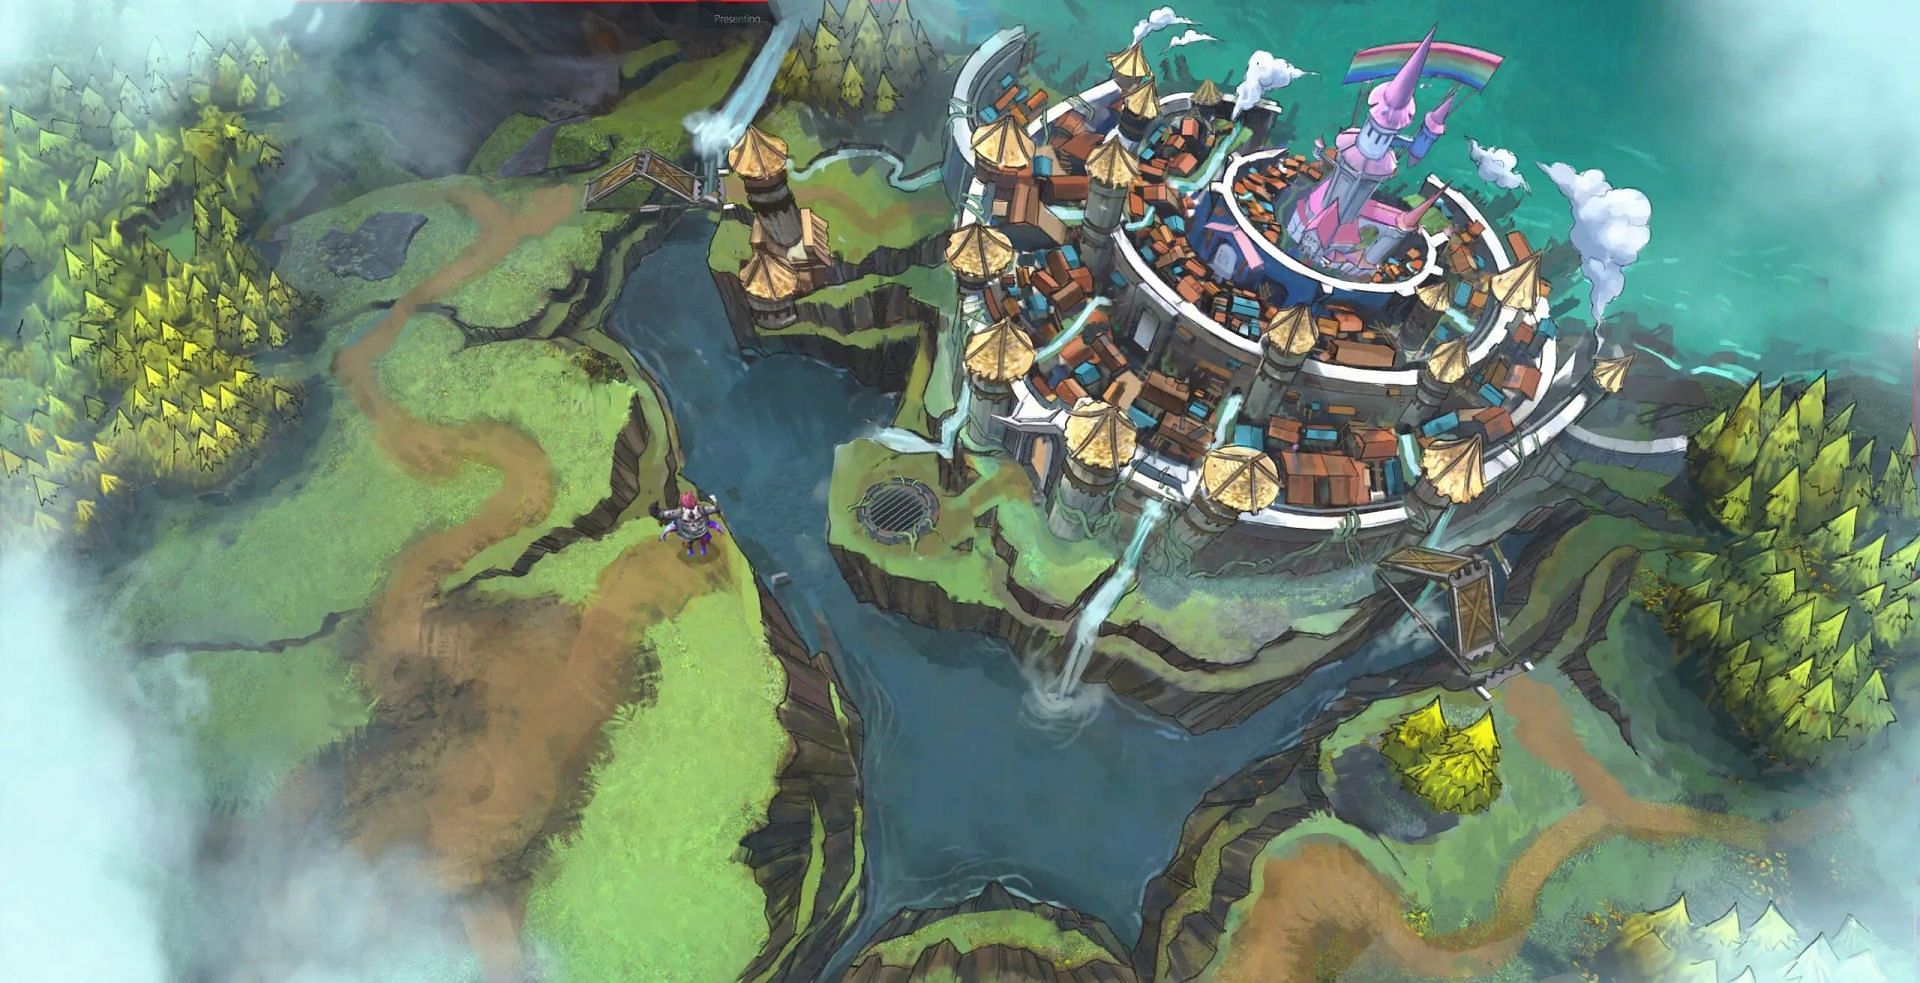 A glimpse of Tiny Tina&rsquo;s Wonderlands&rsquo; Overworld map (Image via Gearbox)